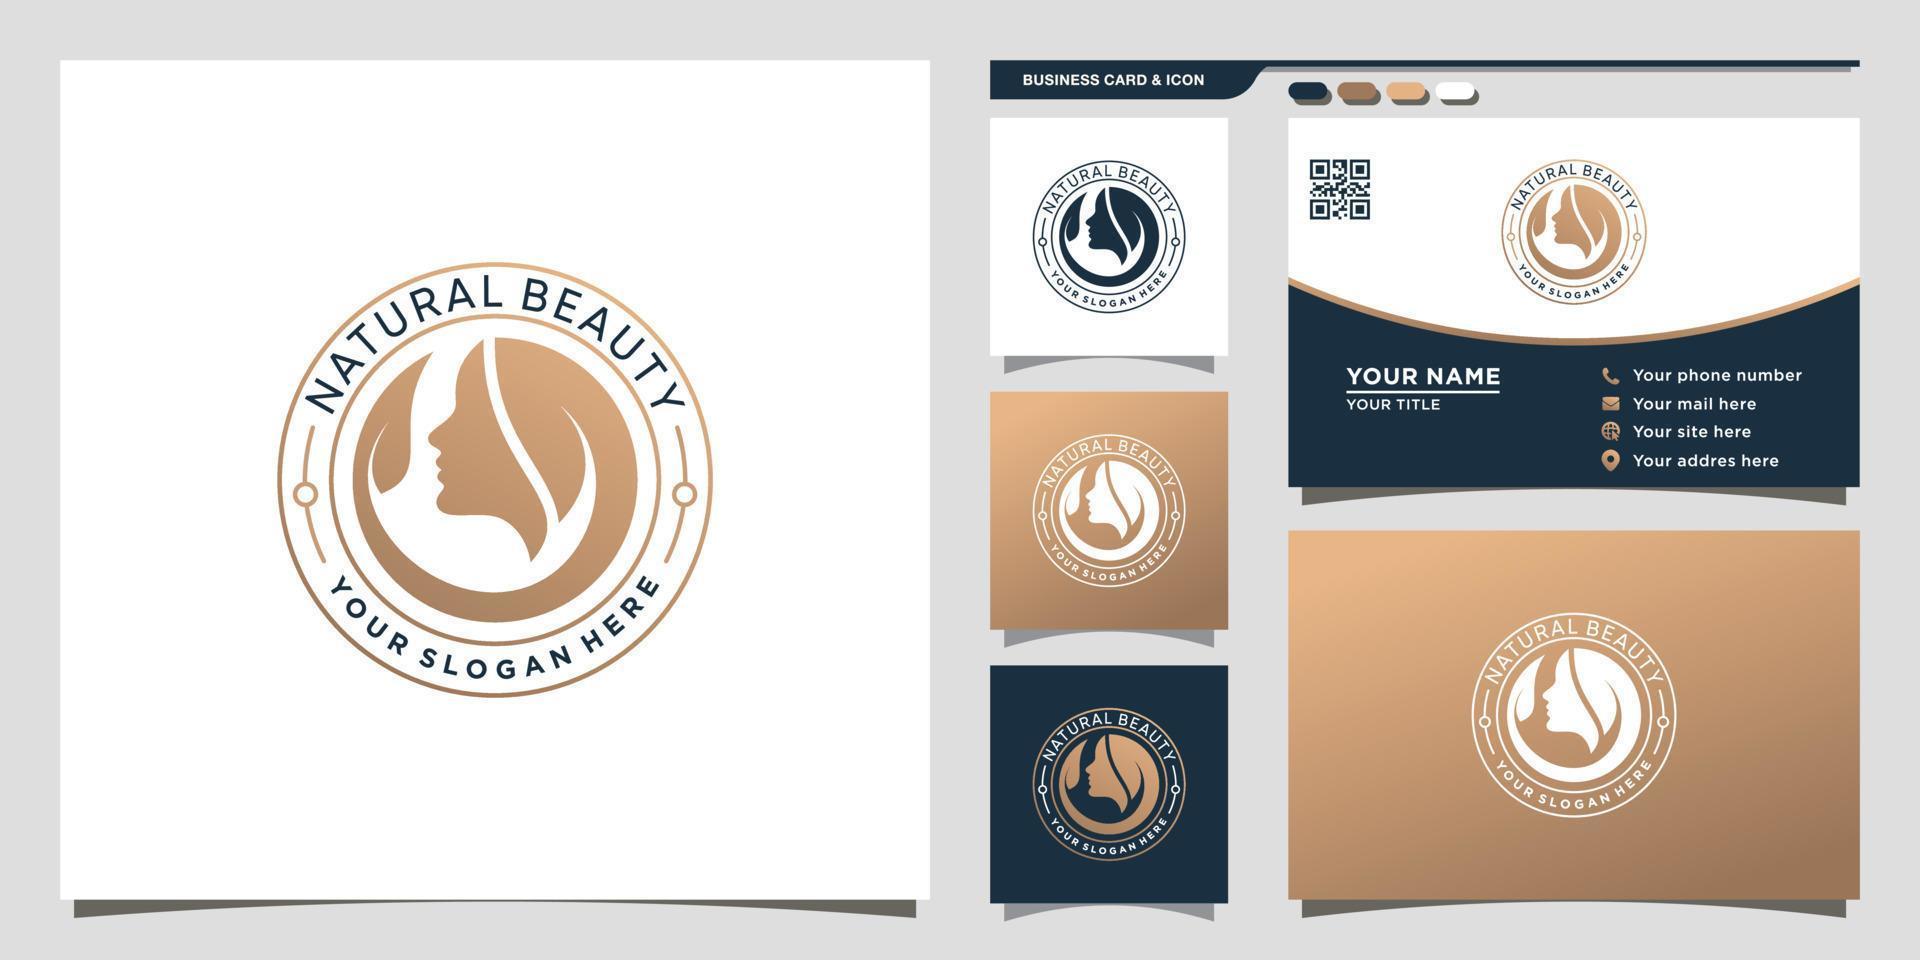 Natural beauty logo with unique modern concept and business card design Premium Vector